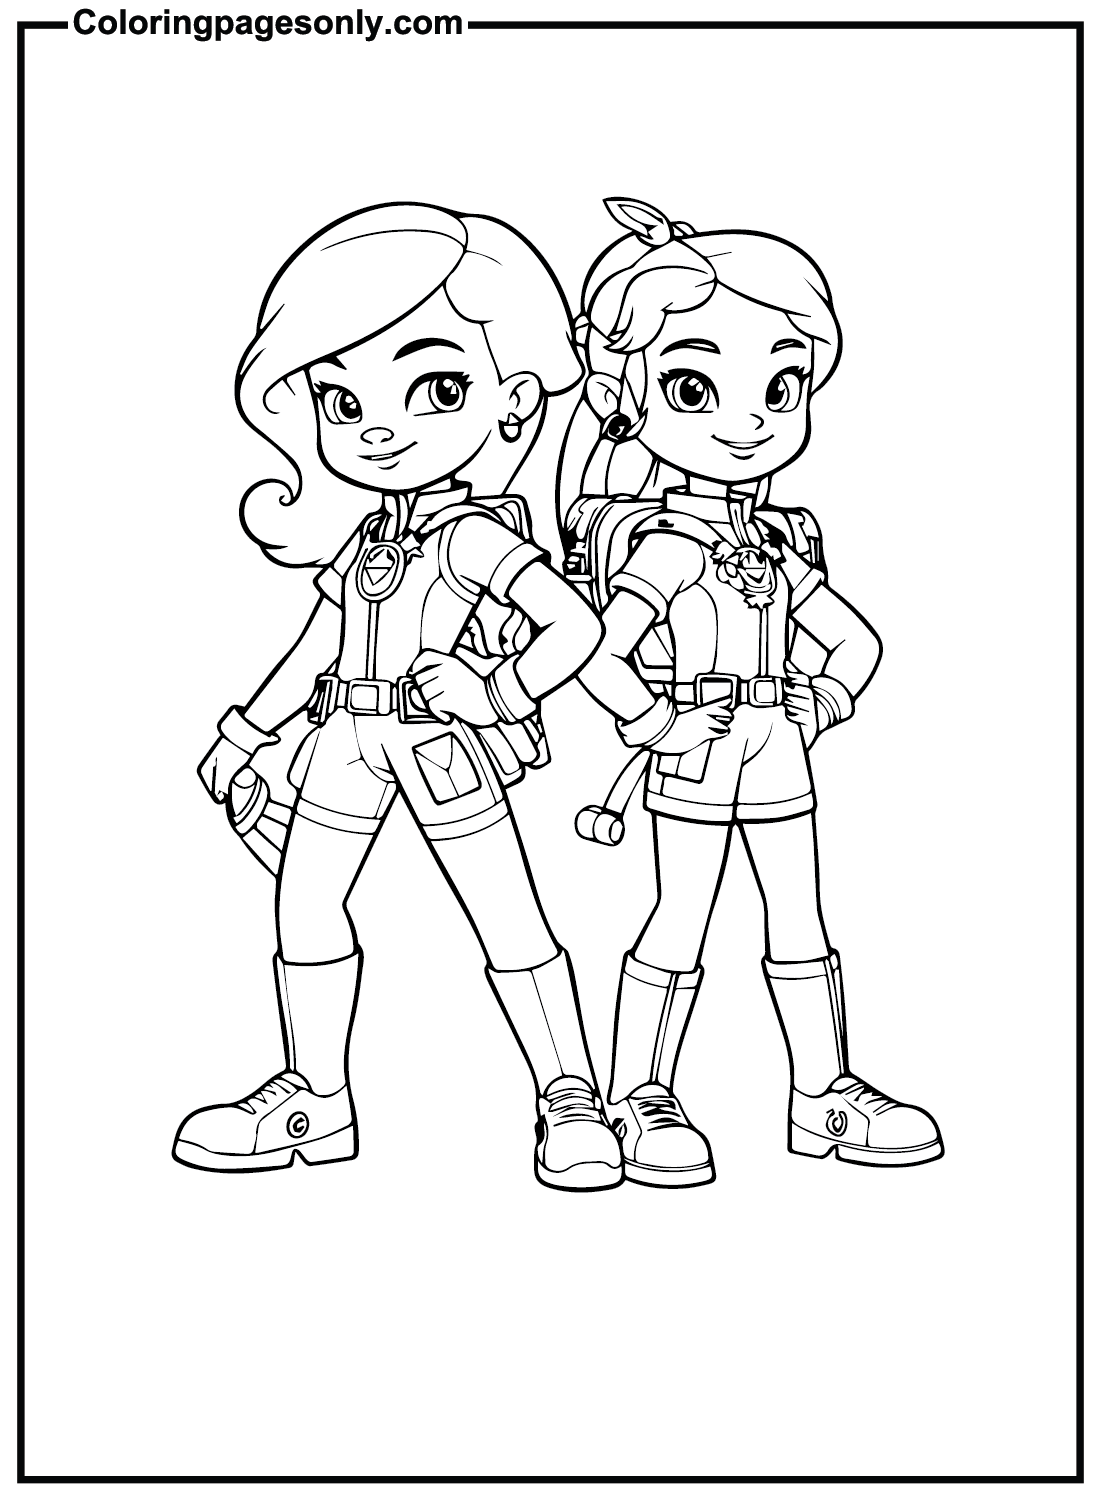 Free Rainbow Rangers Images Coloring Pages